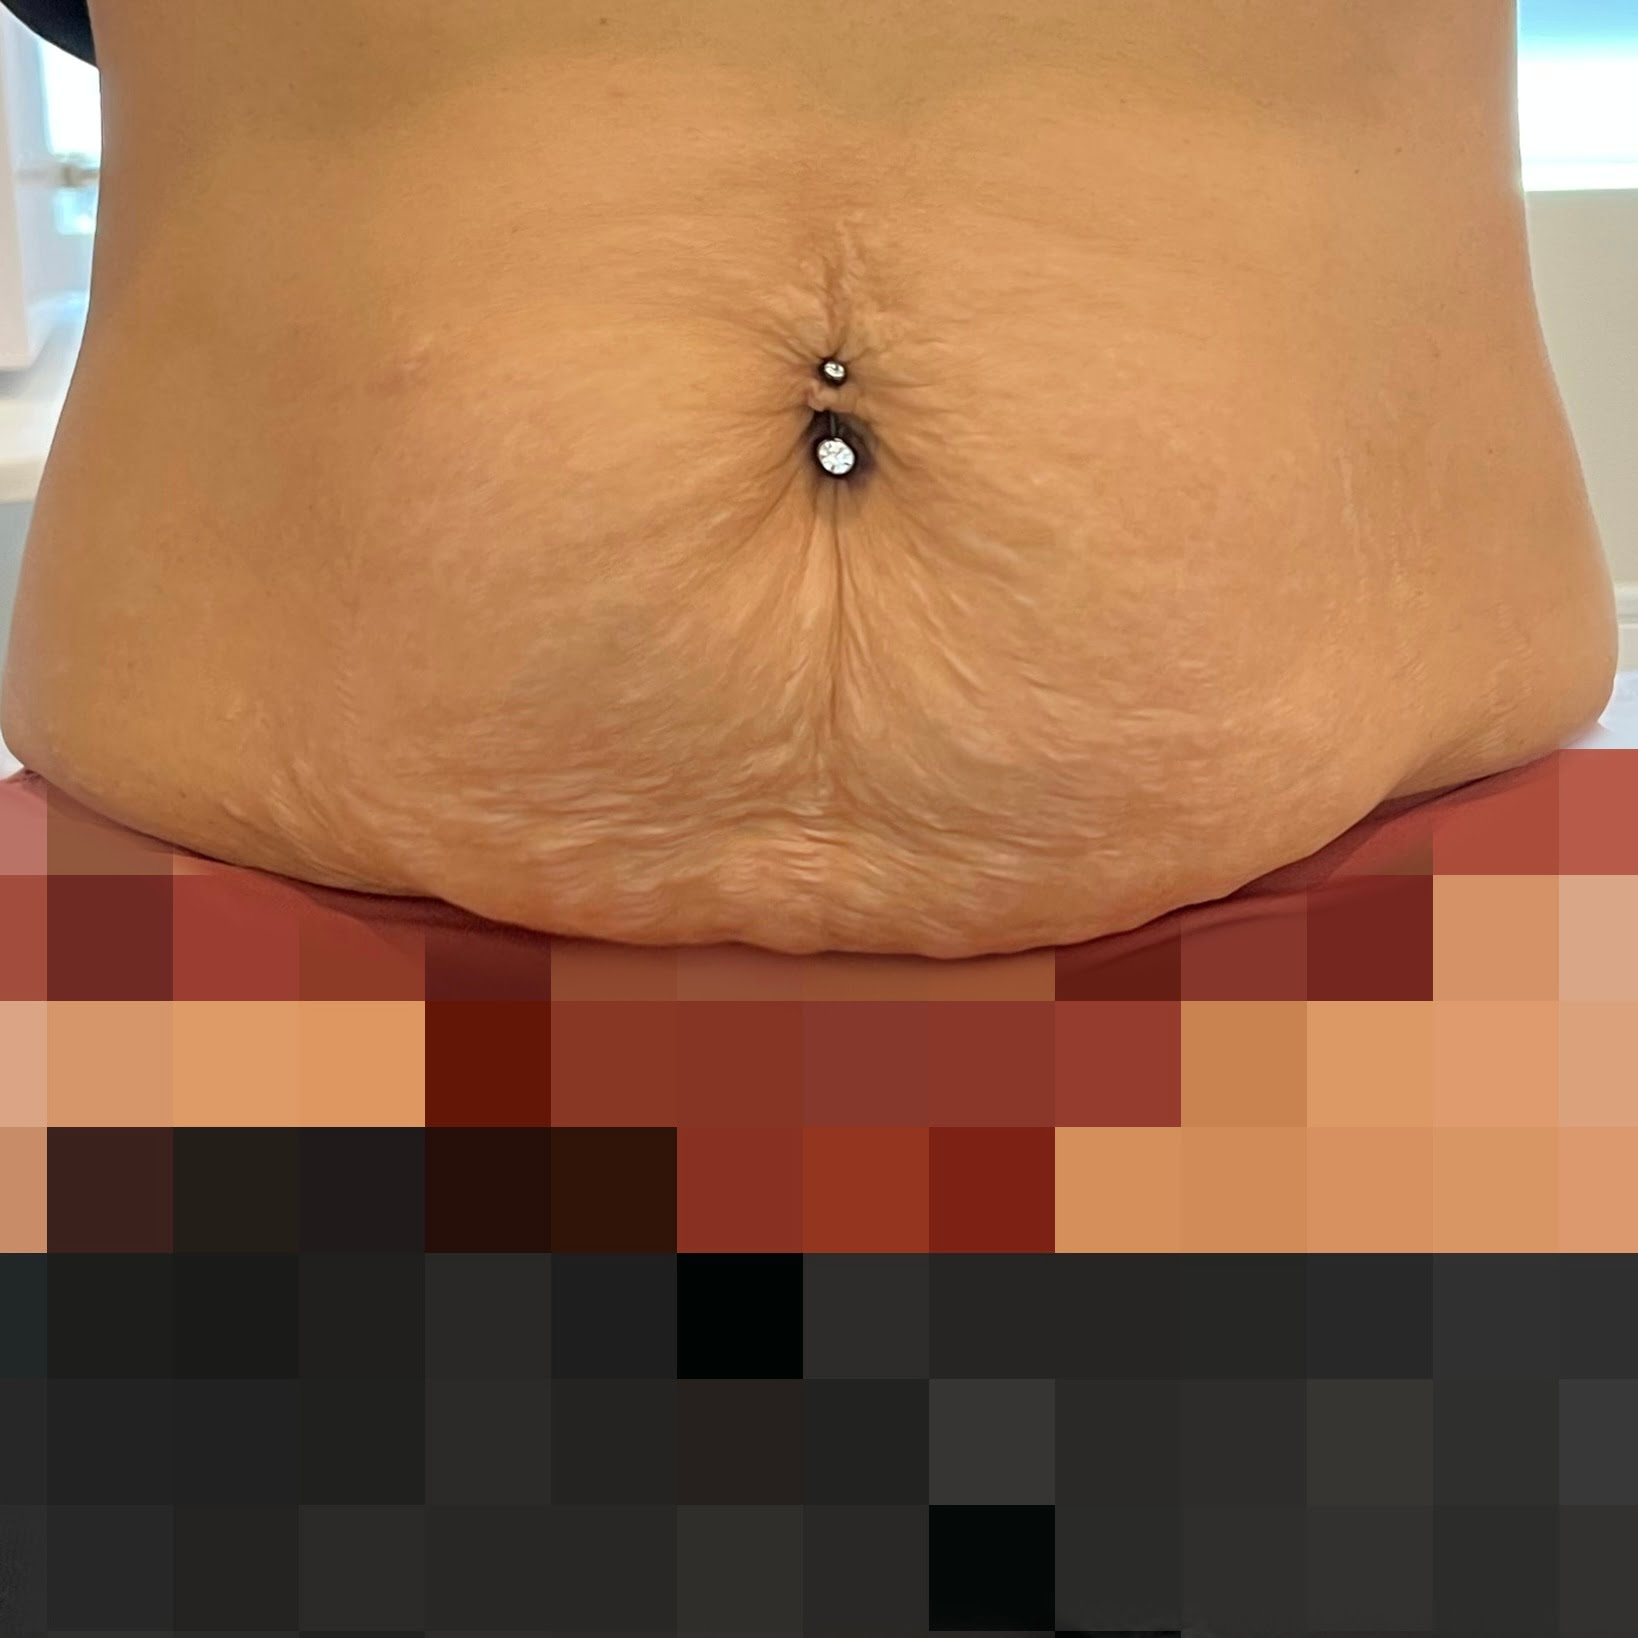 After Thermage FLX body tightening for stomach